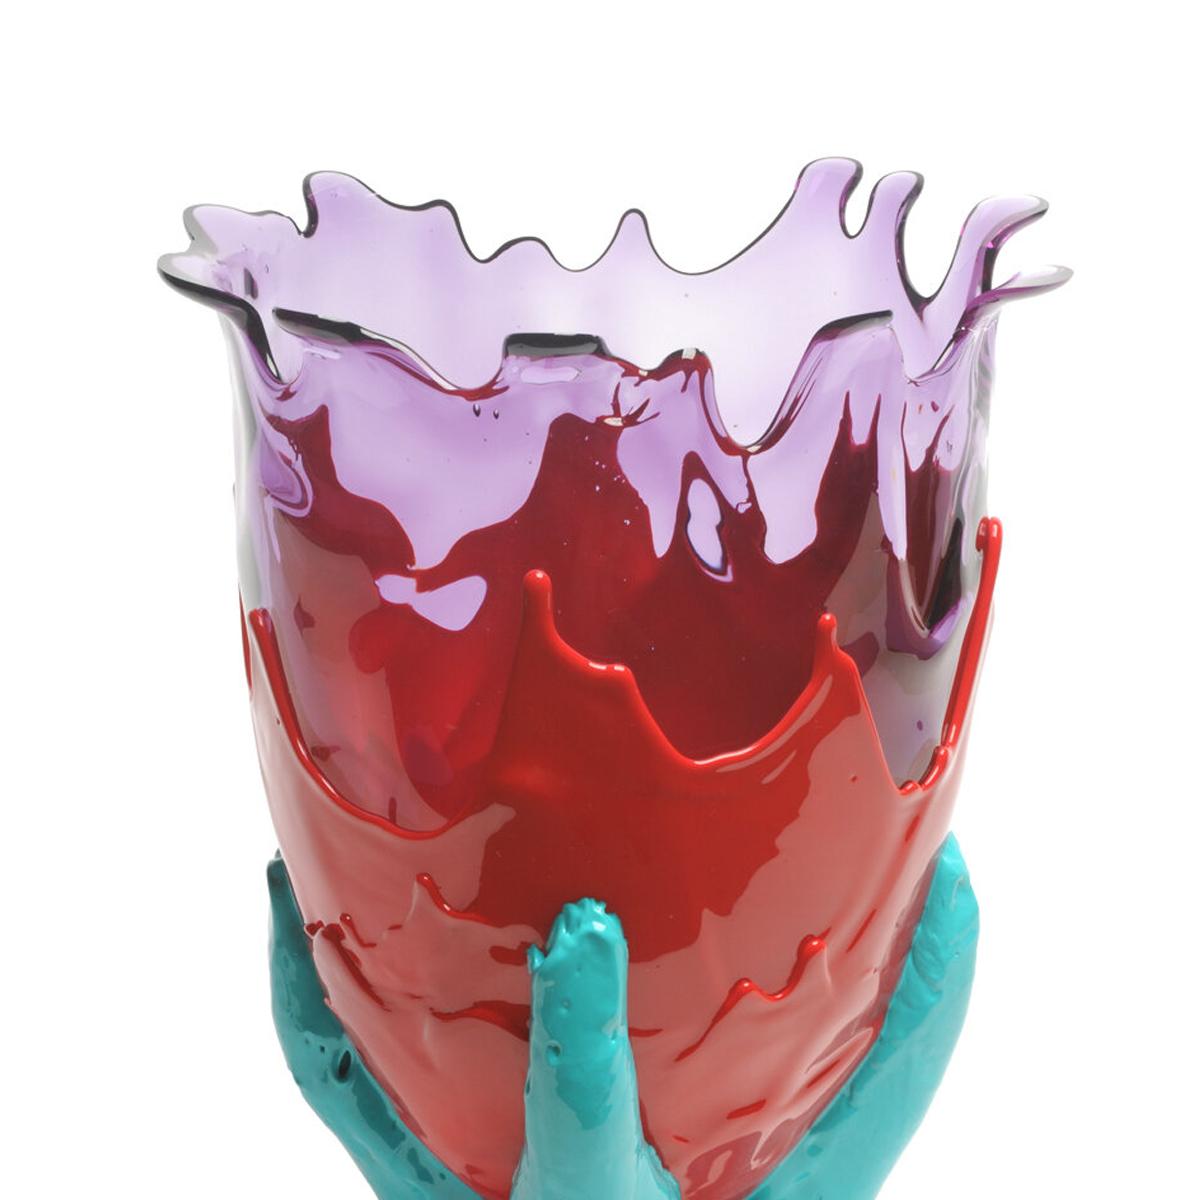 Clear extra colour vase - clear lilac, matt red, matt turquoise.

Vase in soft resin designed by Gaetano Pesce in 1995 for Fish Design collection.

Measures: M Ø 16cm x H 26cm
Colours: clear lilac, matt red, matt turquoise.
Other sizes